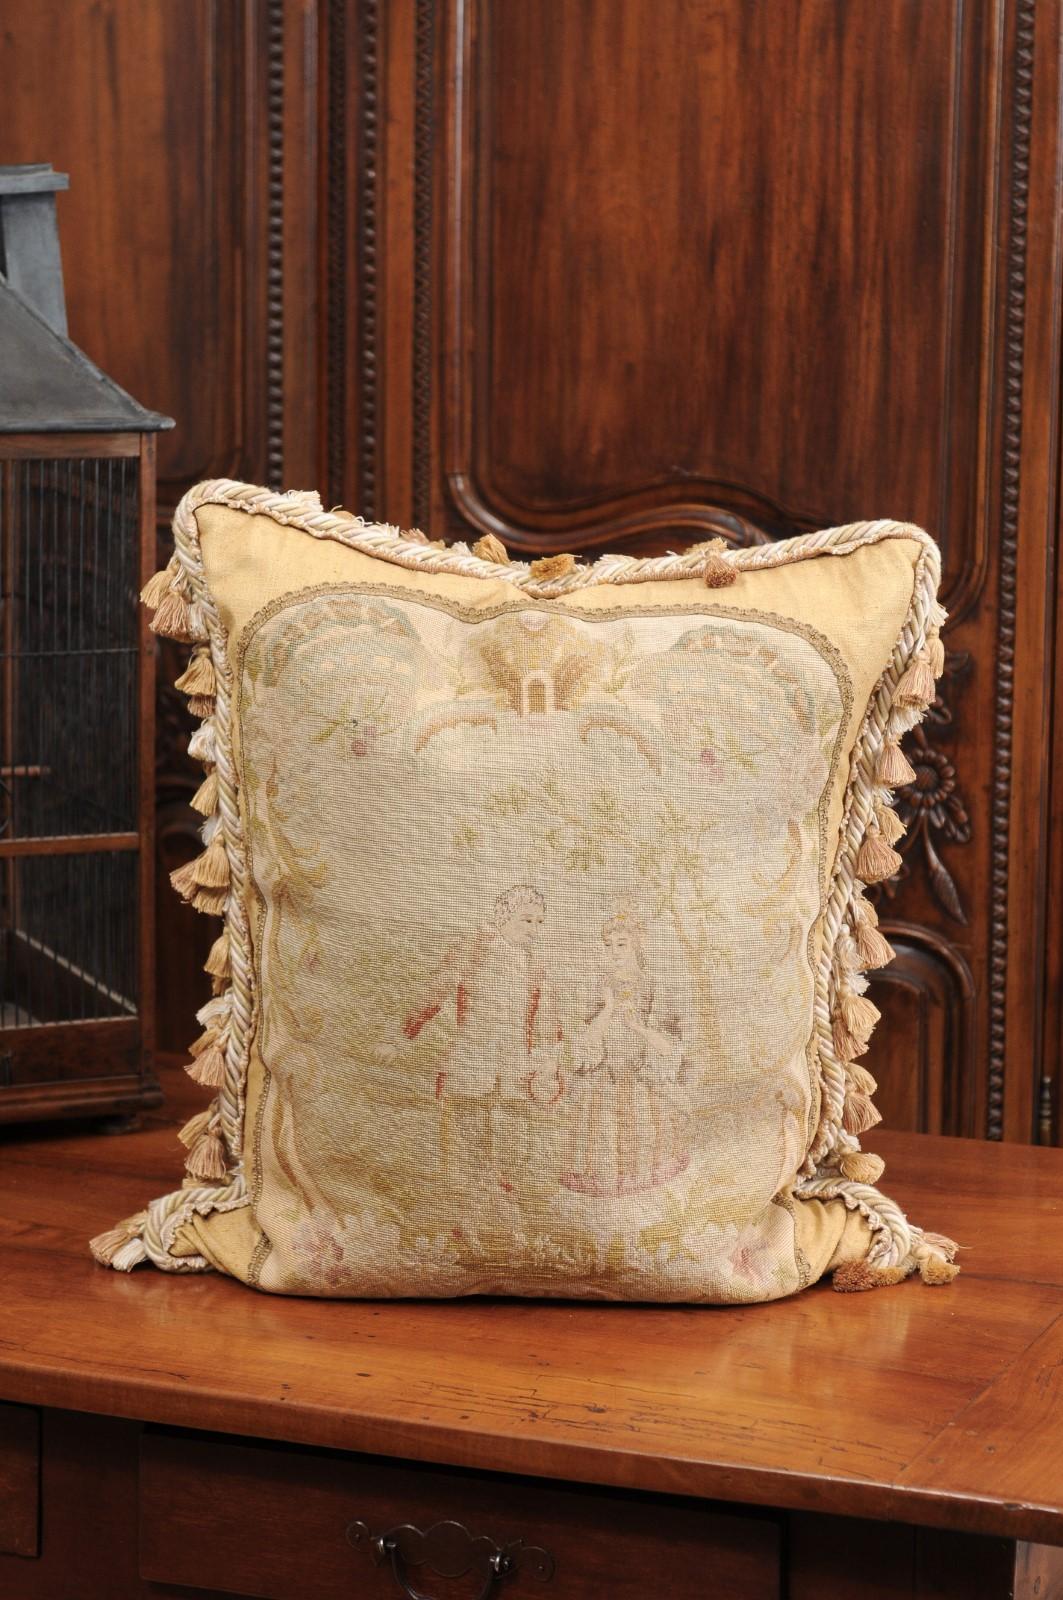 A French needlepoint tapestry pillow from the 19th century, depicting two artistocrates walking in a landscape. Created in France during the 19th century, this needlepoint tapestry pillow charms us with its romantic depiction of a man courting a